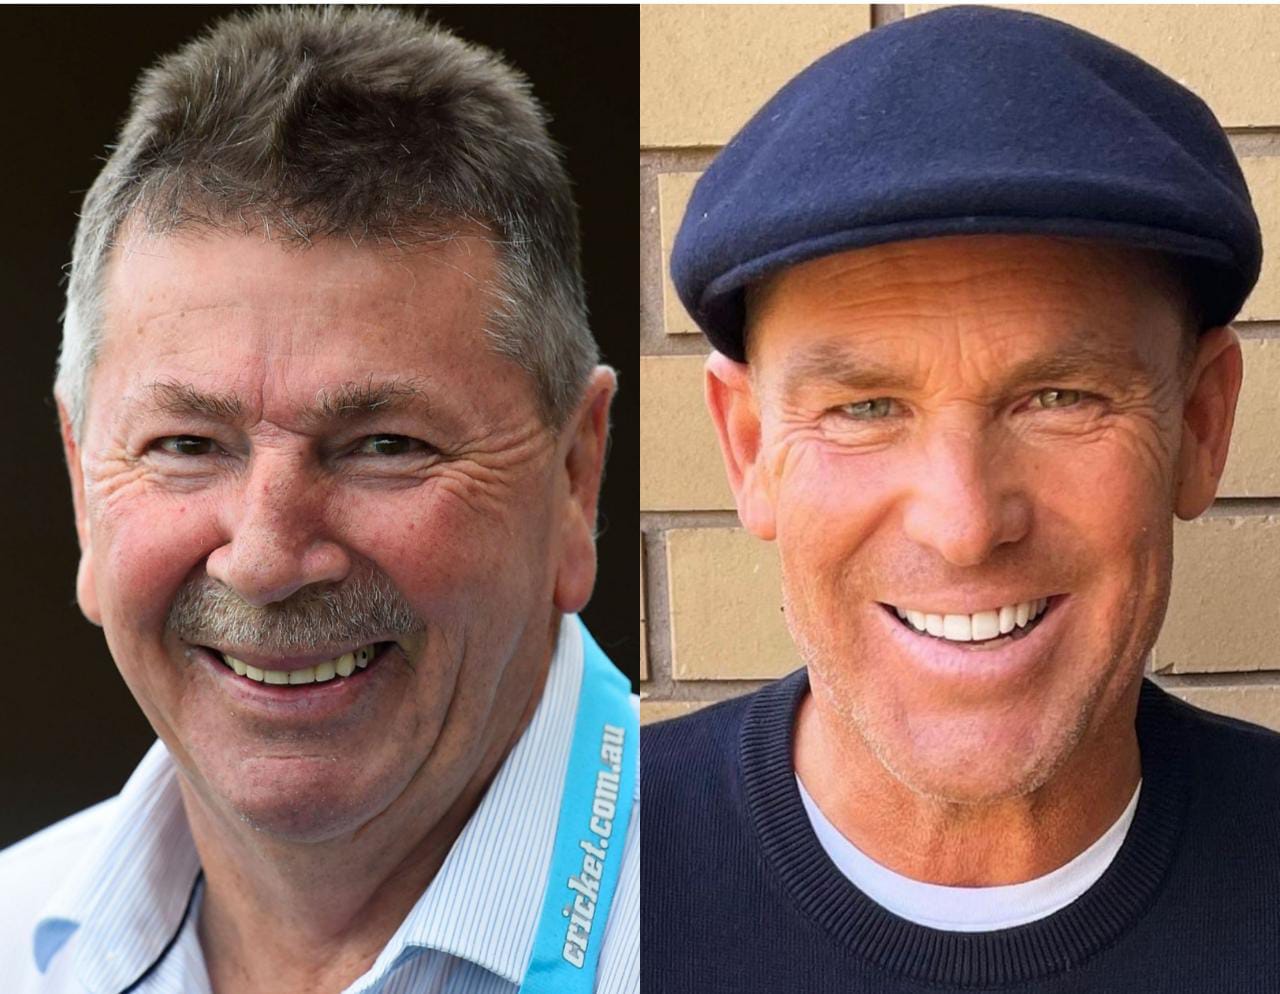 Shane Warne paid tribute to Rod Marsh in last Twitter post before death